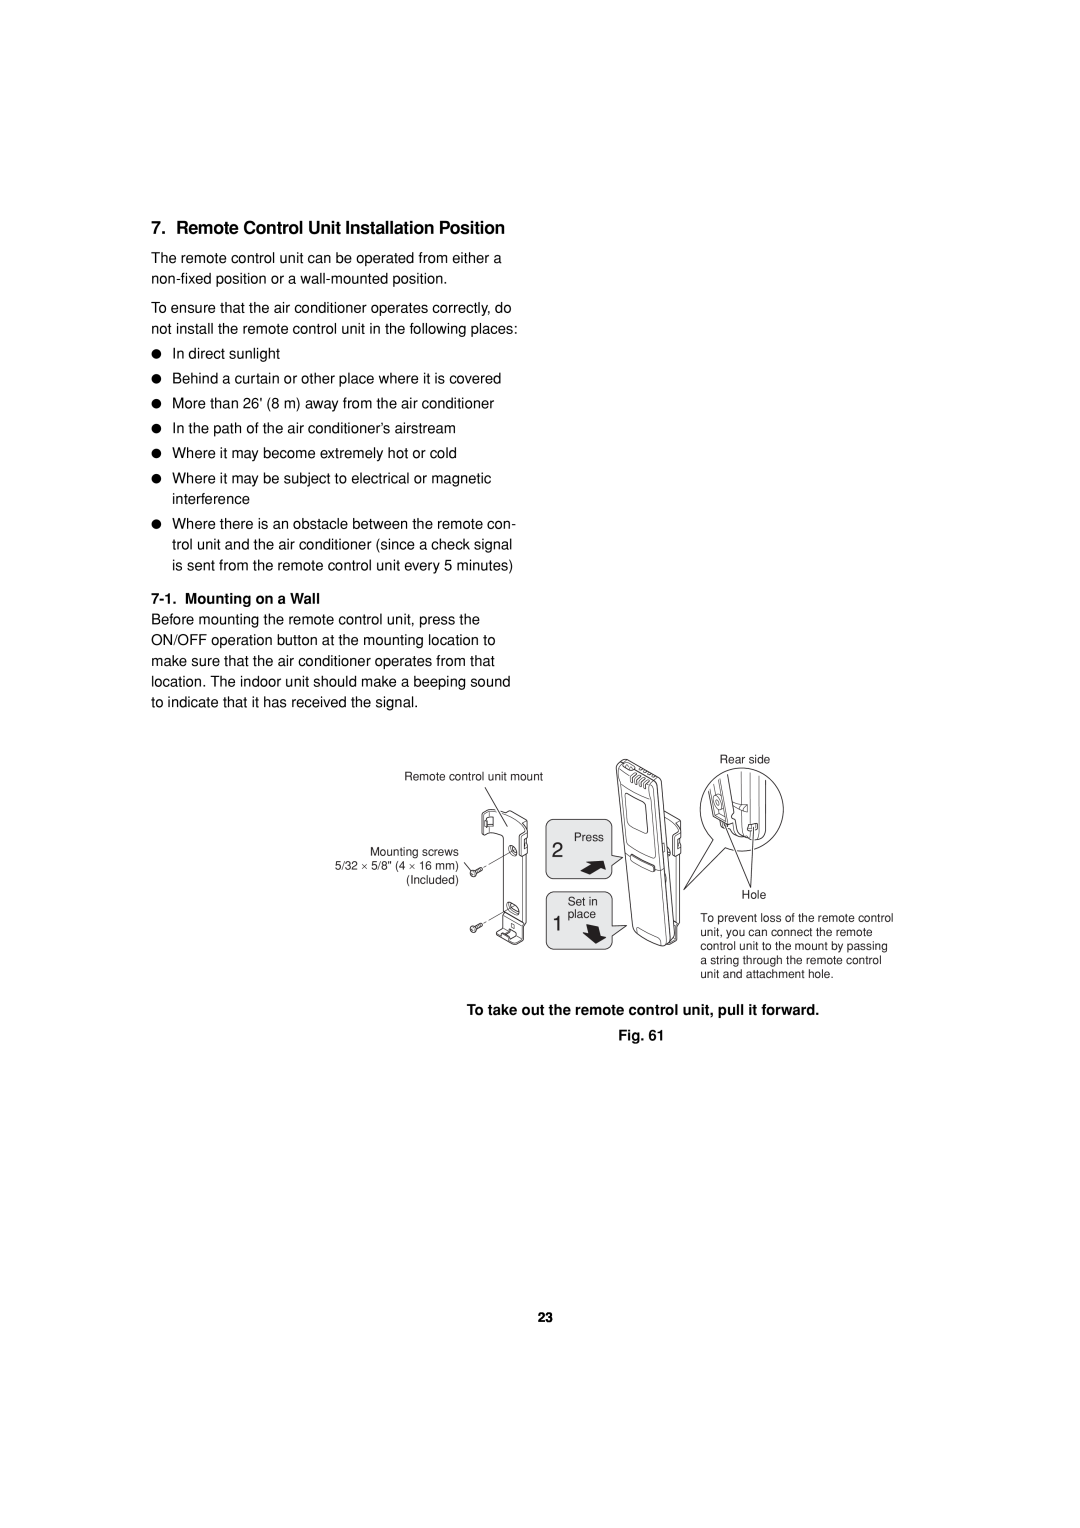 Sanyo CH1872, CH2472 service manual Remote Control Unit Installation Position, Mounting on a Wall, Fig 